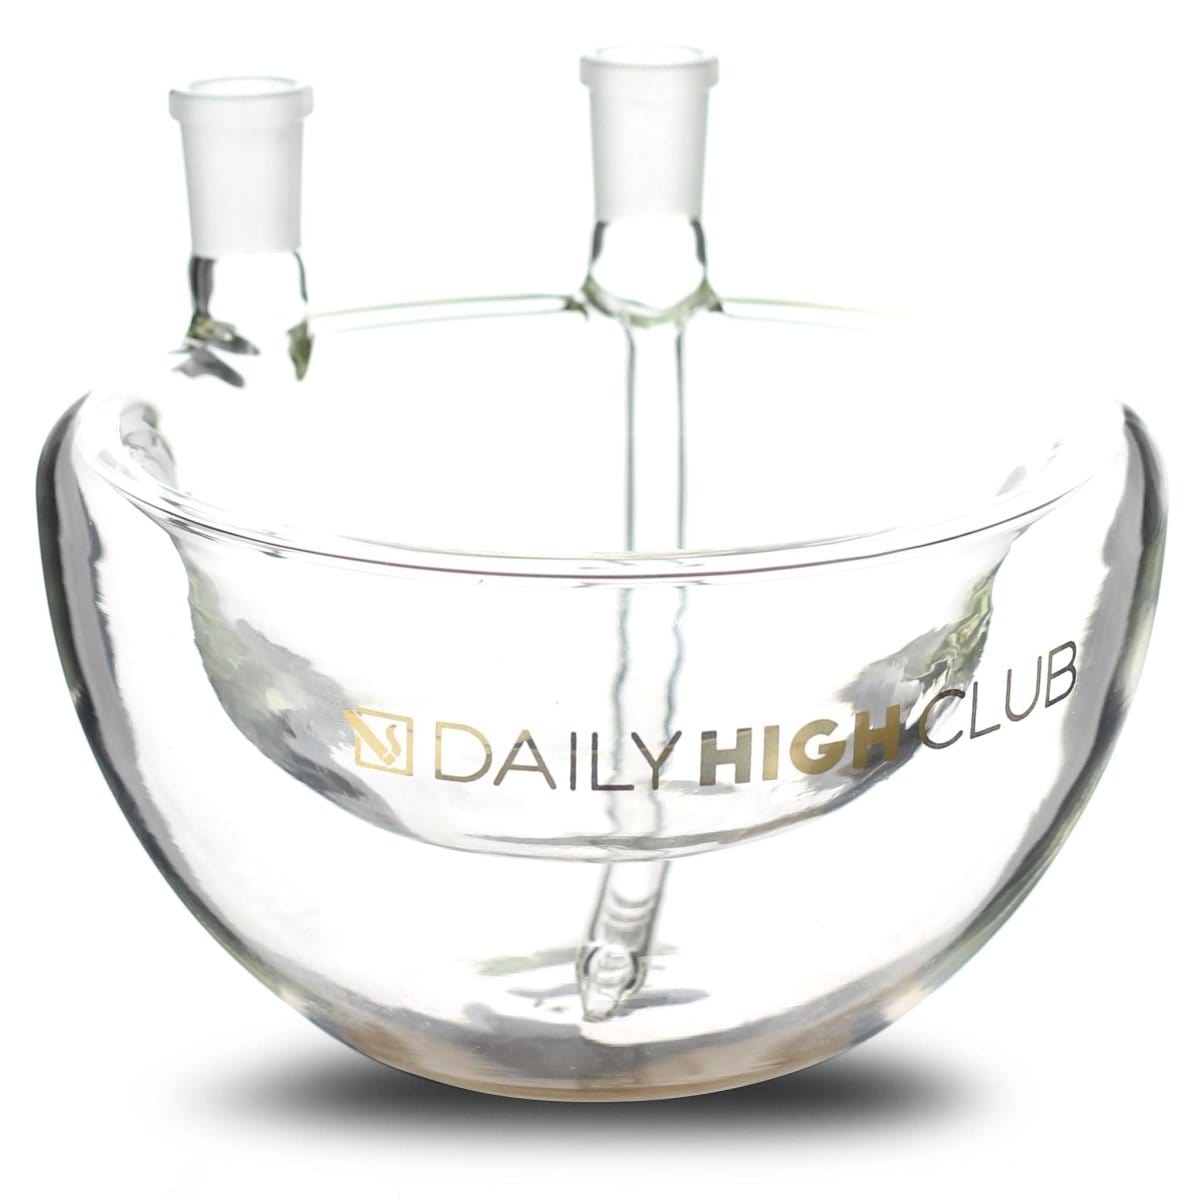 Daily High Club Glass Daily High Club "Cereal Bowl" Bong